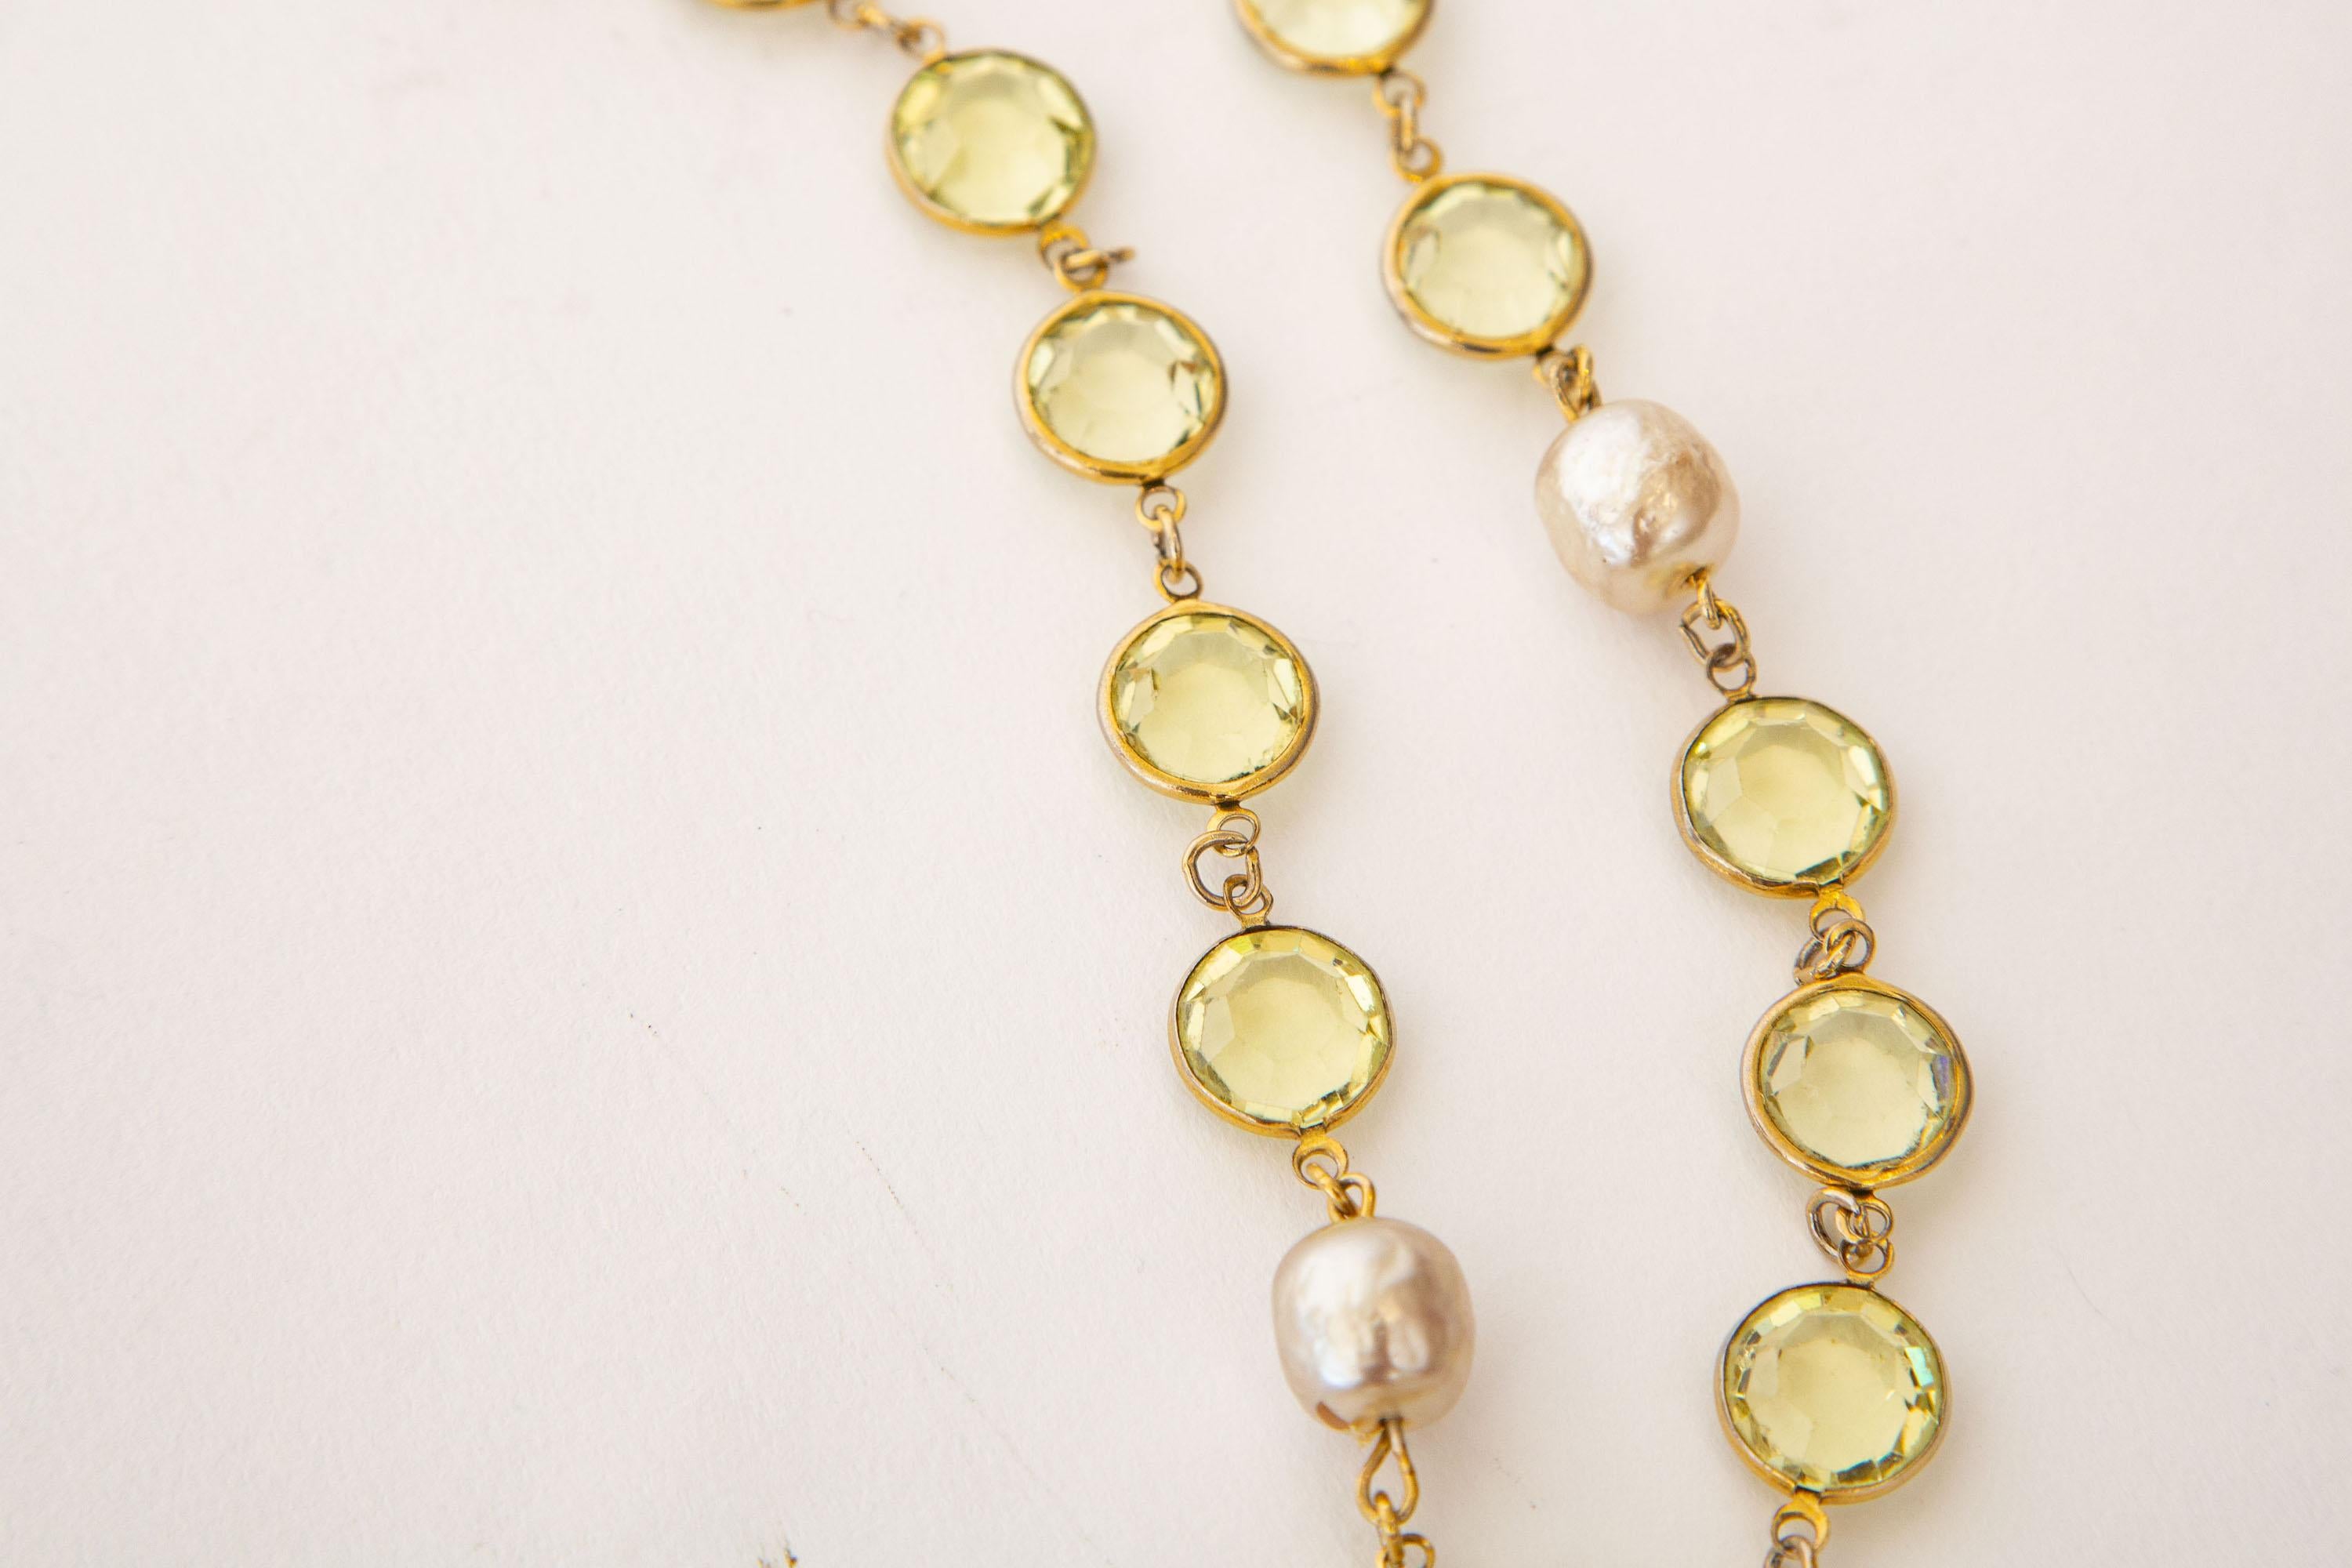 Women's Vintage Chanel Chartreuse Beveled Crystals And Faux Pearl Sautoir Wrap Necklace